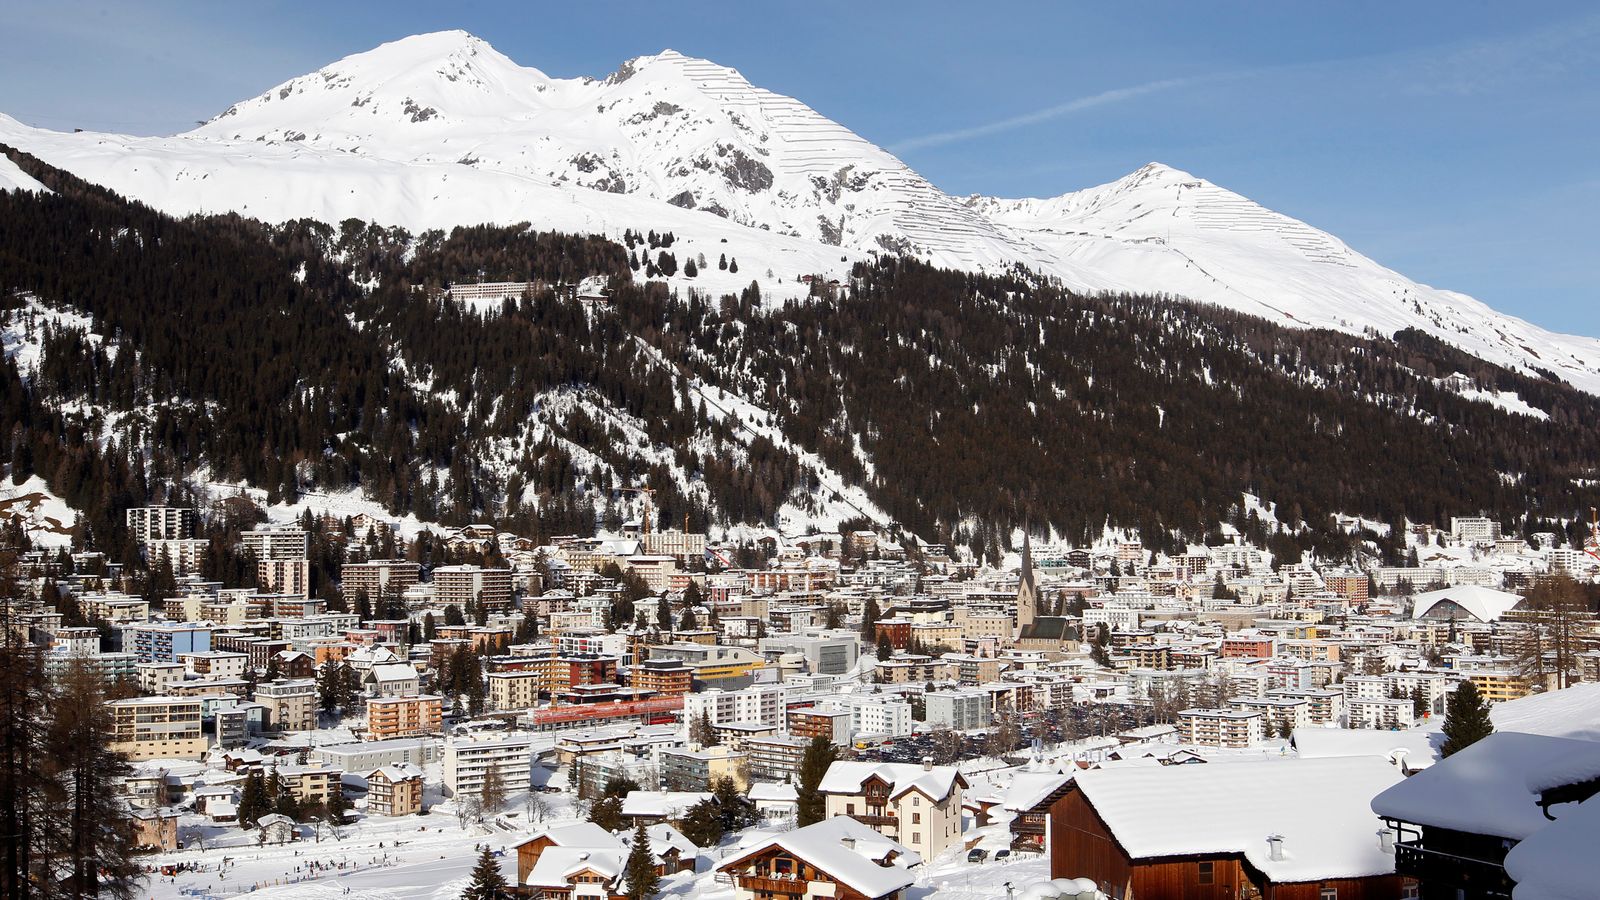 Why an absence of A-listers at Davos is not just deep trouble for the World Economic Forum, but for globalisation too